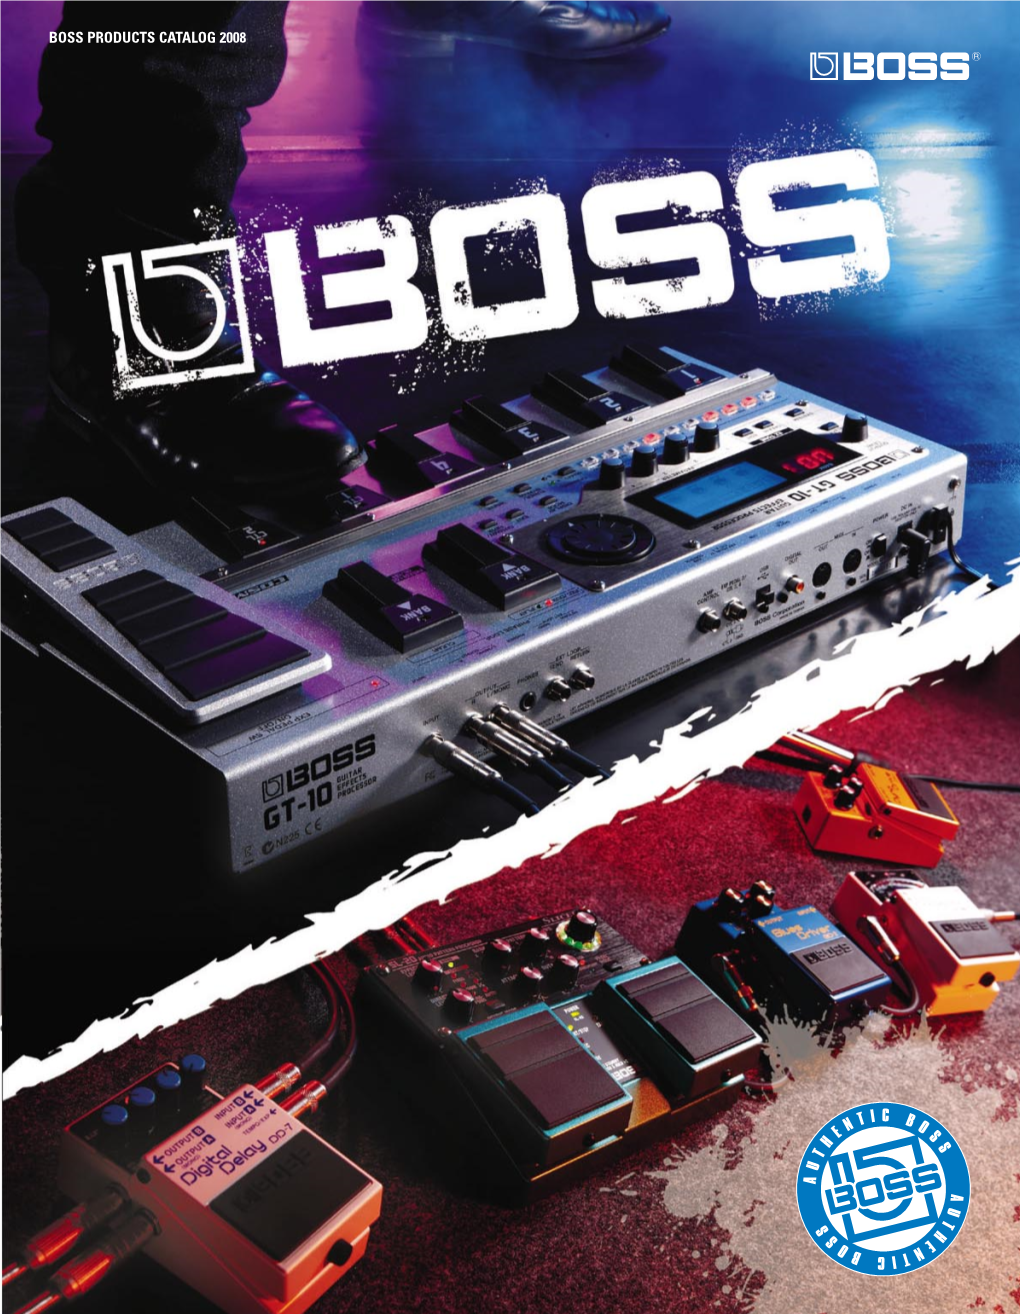 Boss Products Catalog 2008